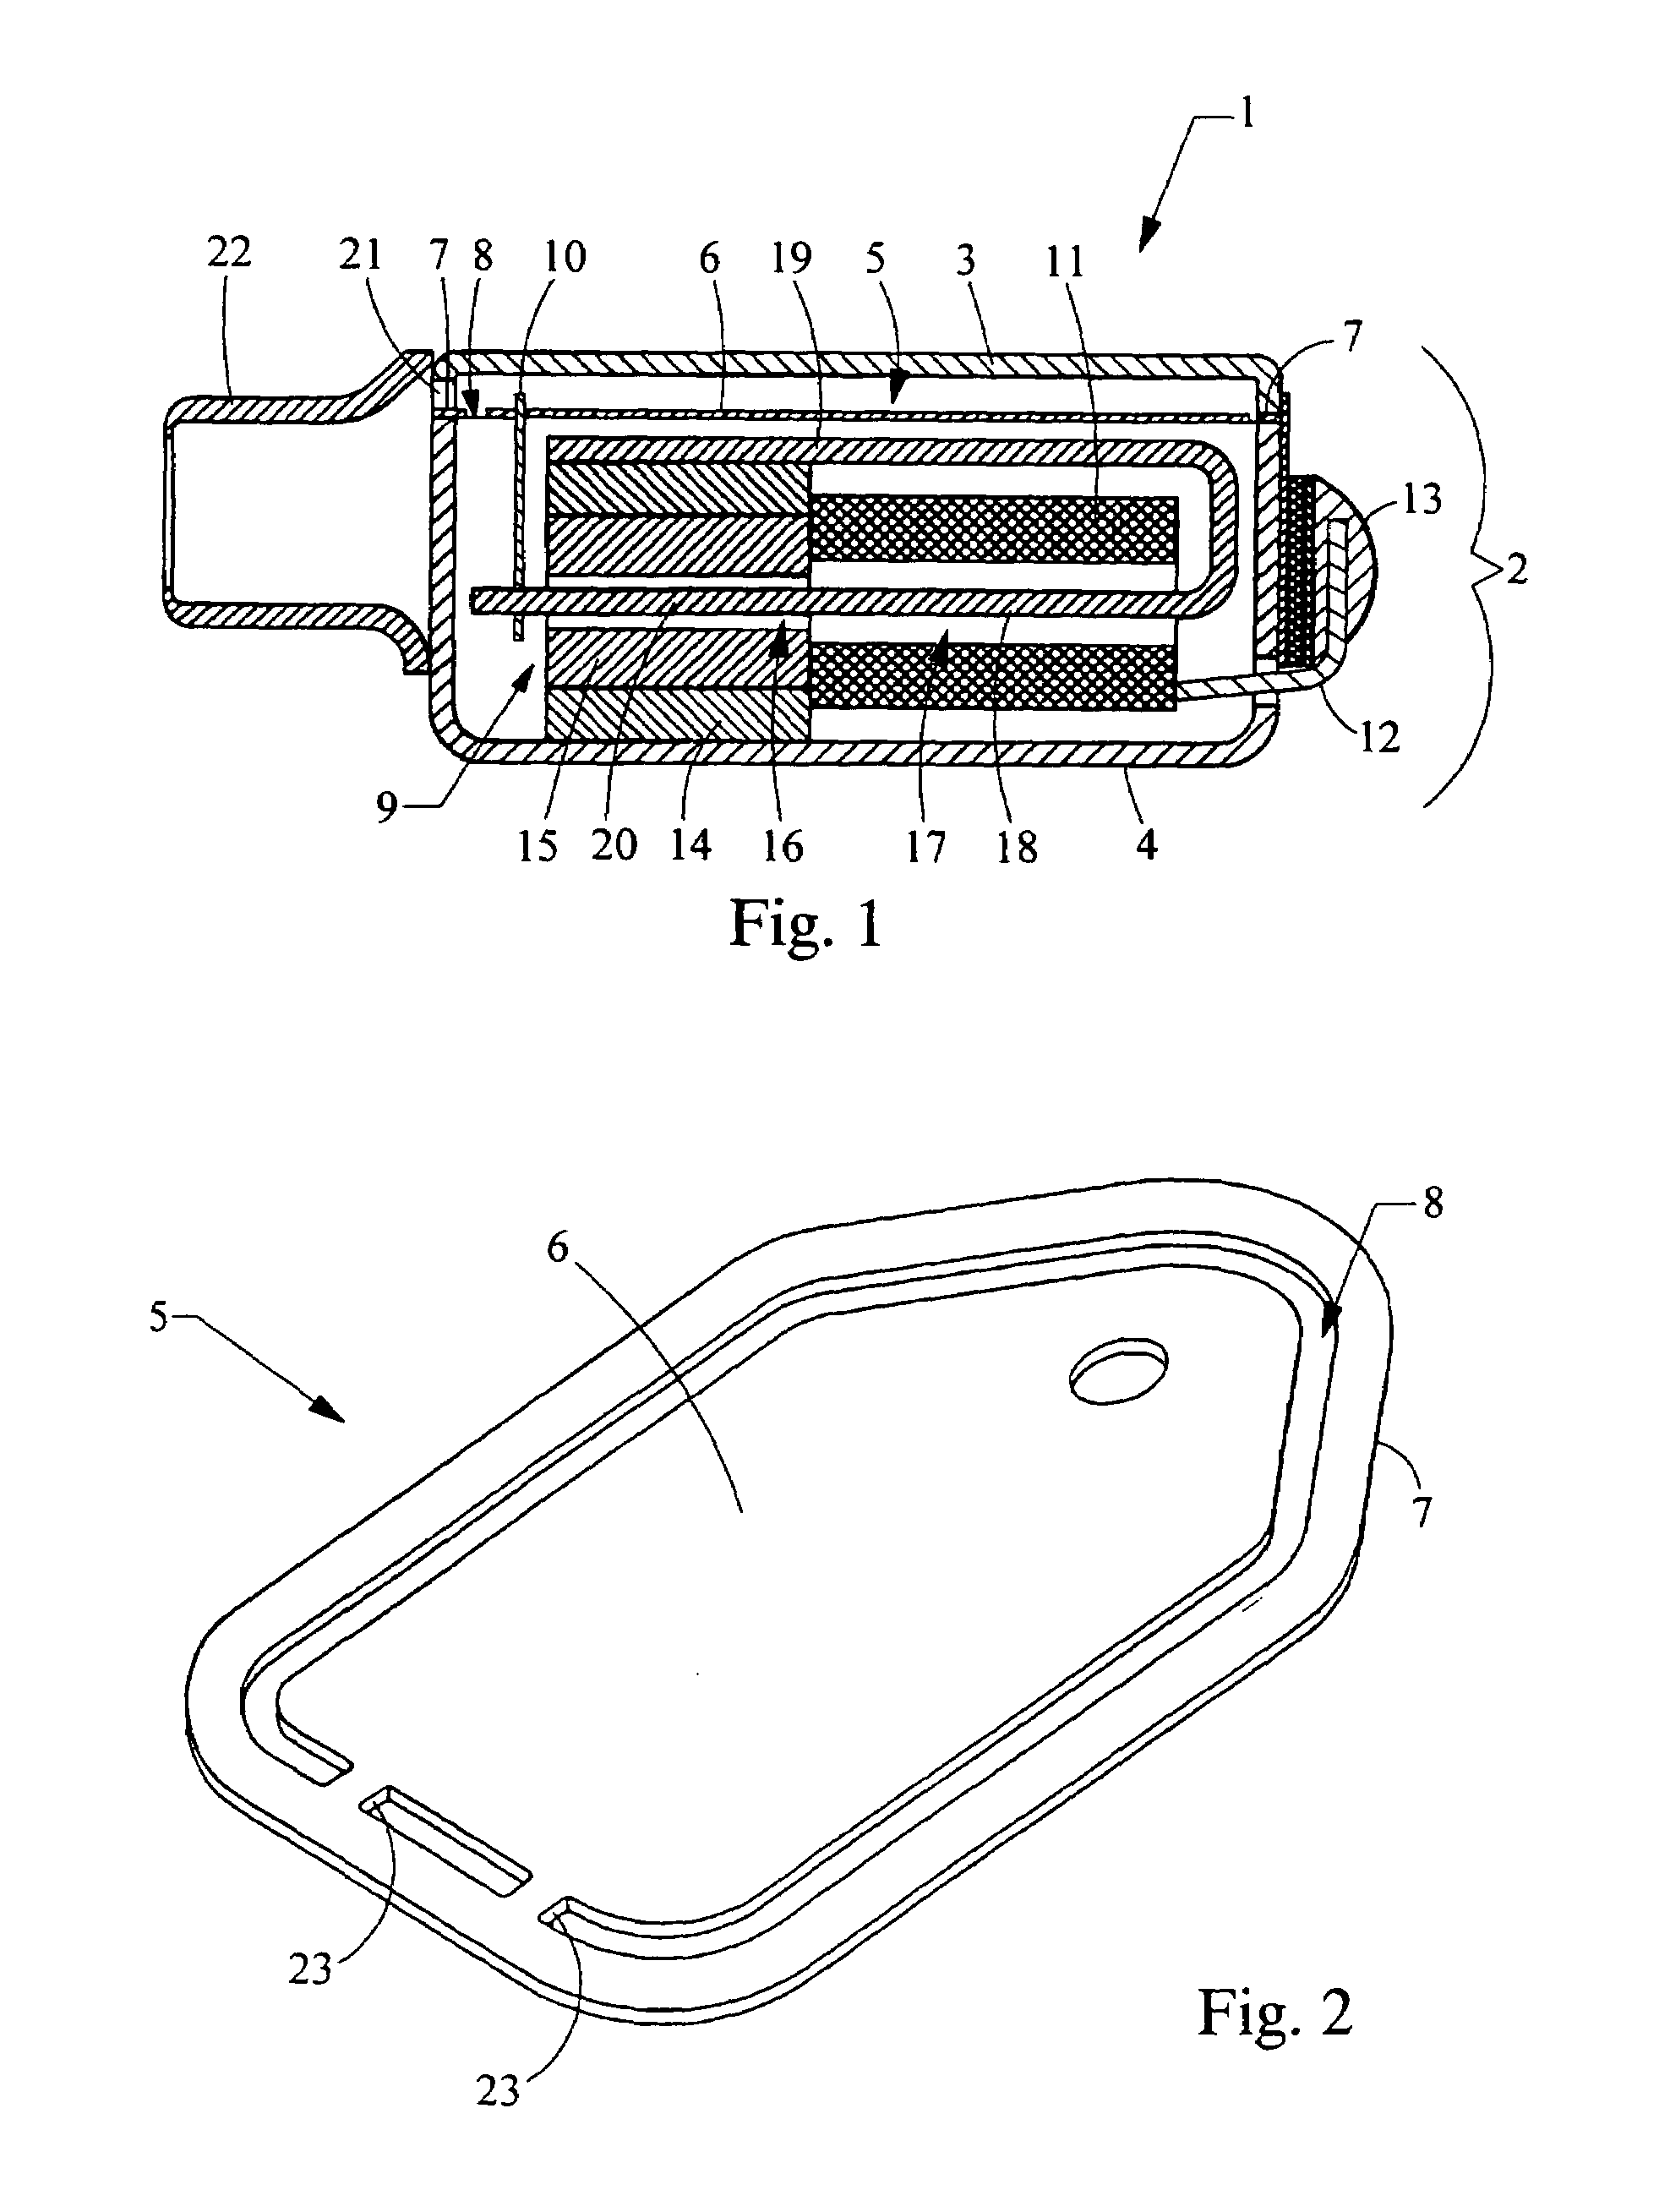 Electroacoustic transducer with a diaphragm, and method for fixing a diaphragm in such transducer